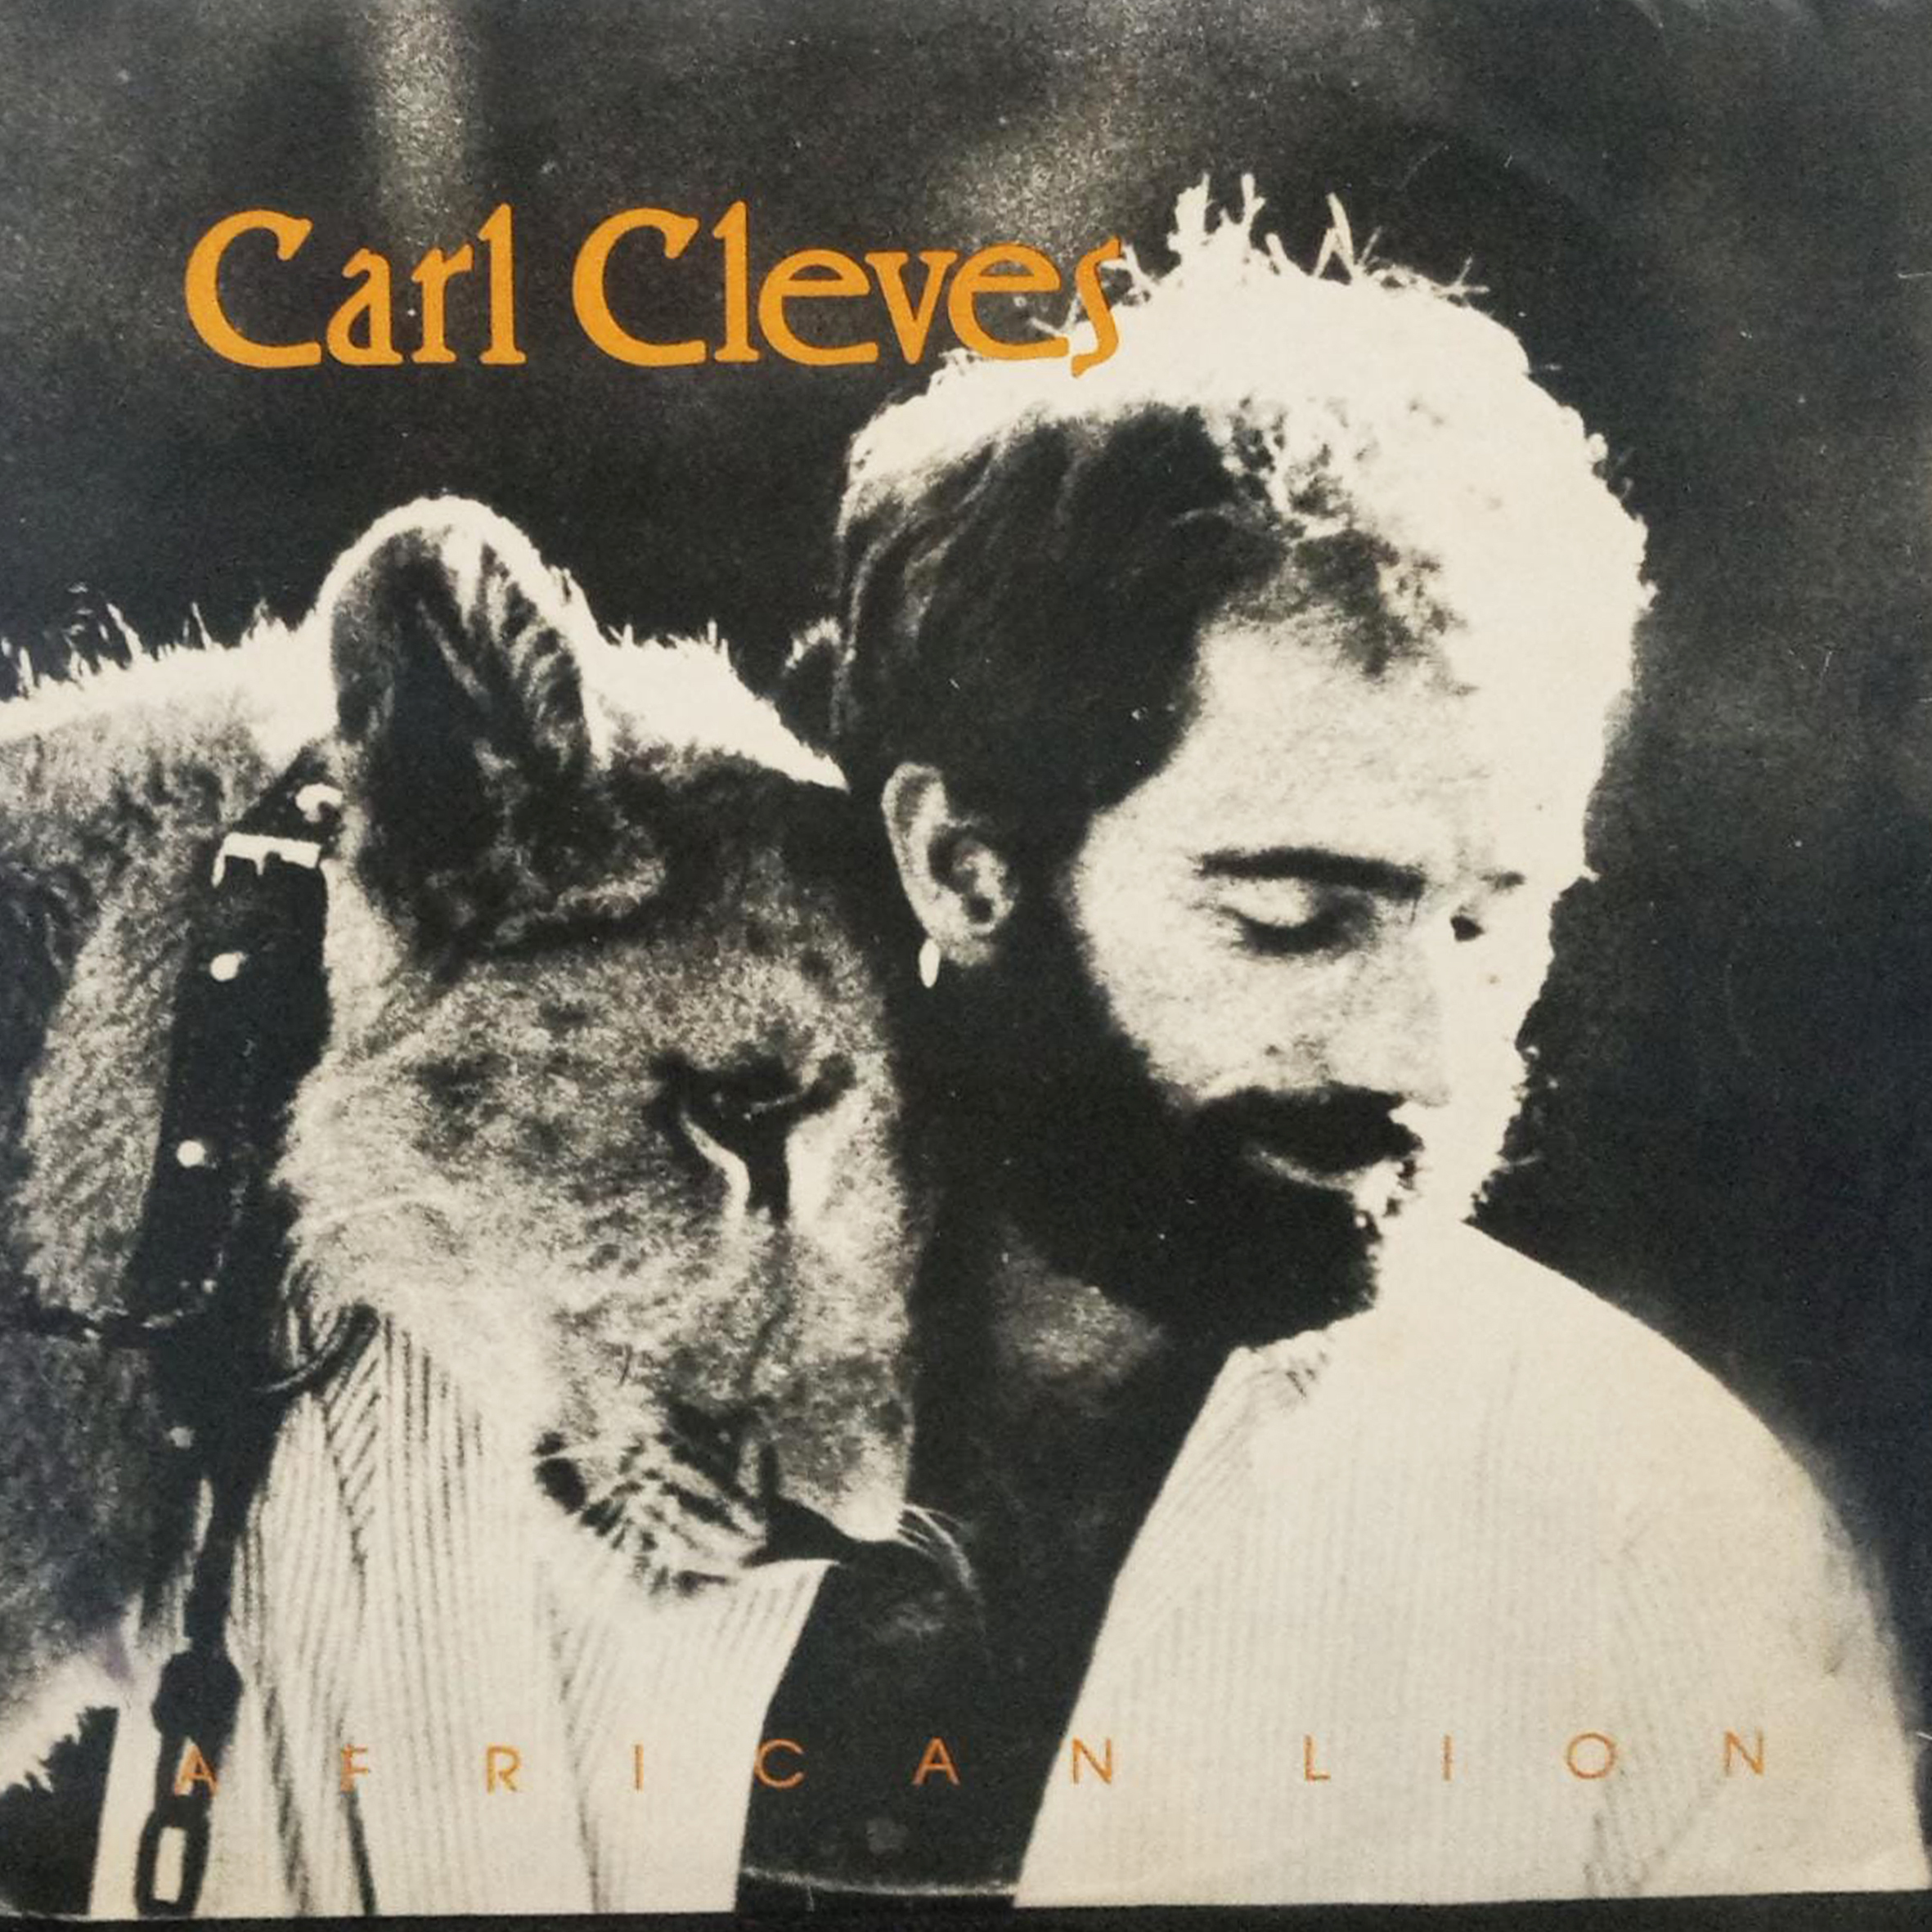 Vinil - Carl Cleves - African Lion